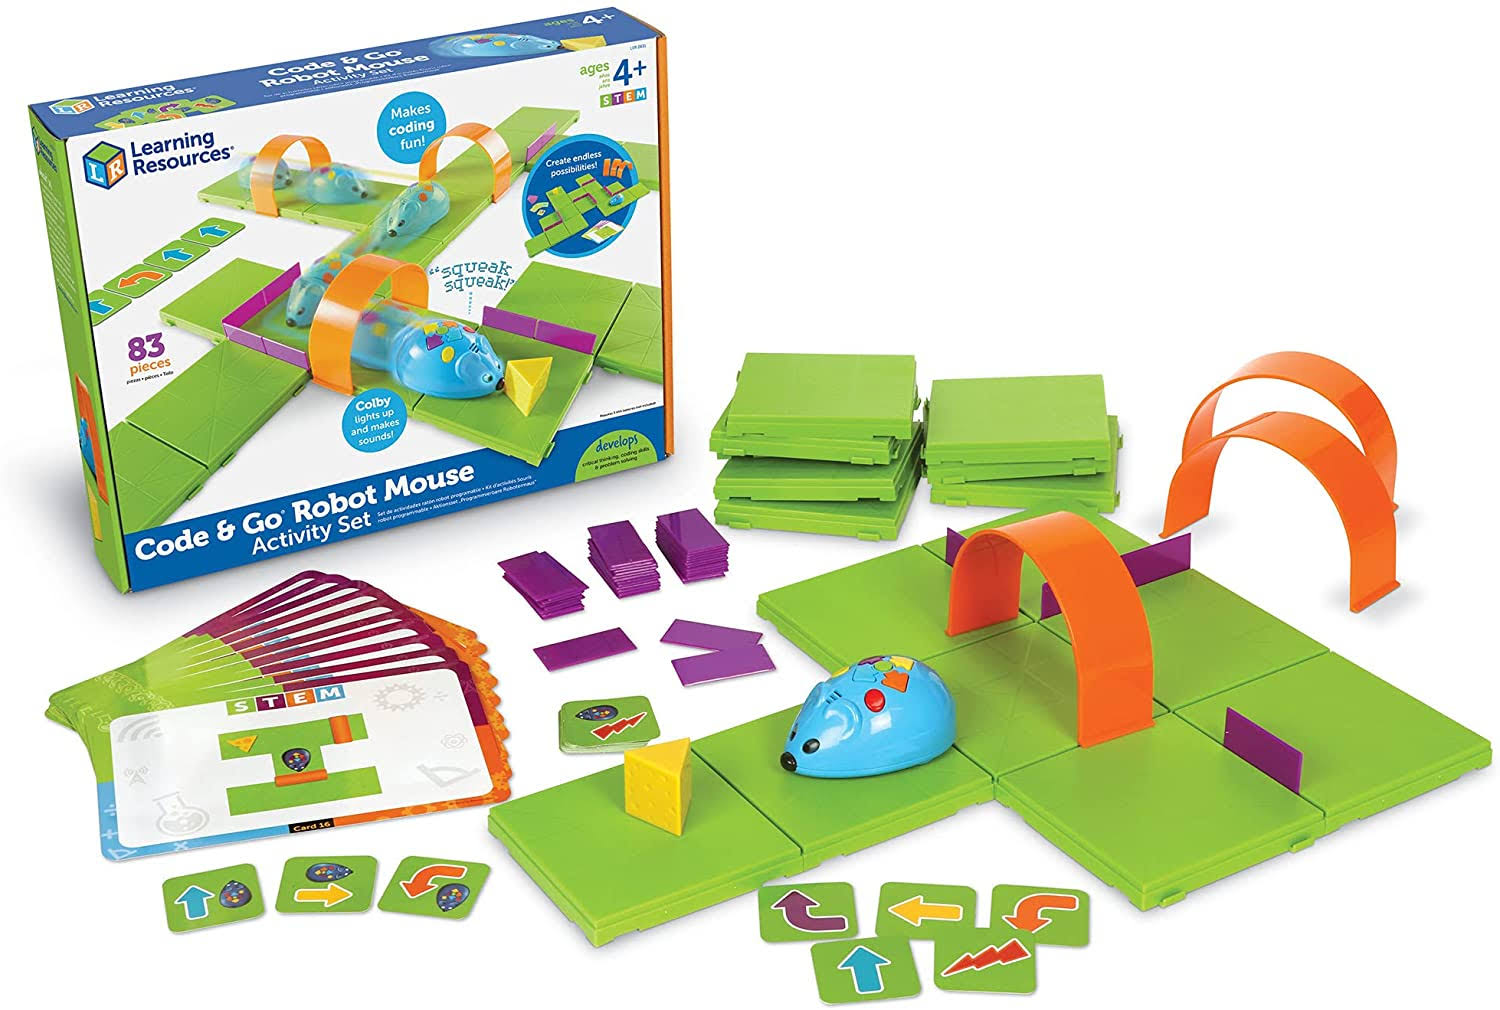 Learning Resources LER2831 STEM-Code & Go Robot Mouse Activity Set, Multicoloured